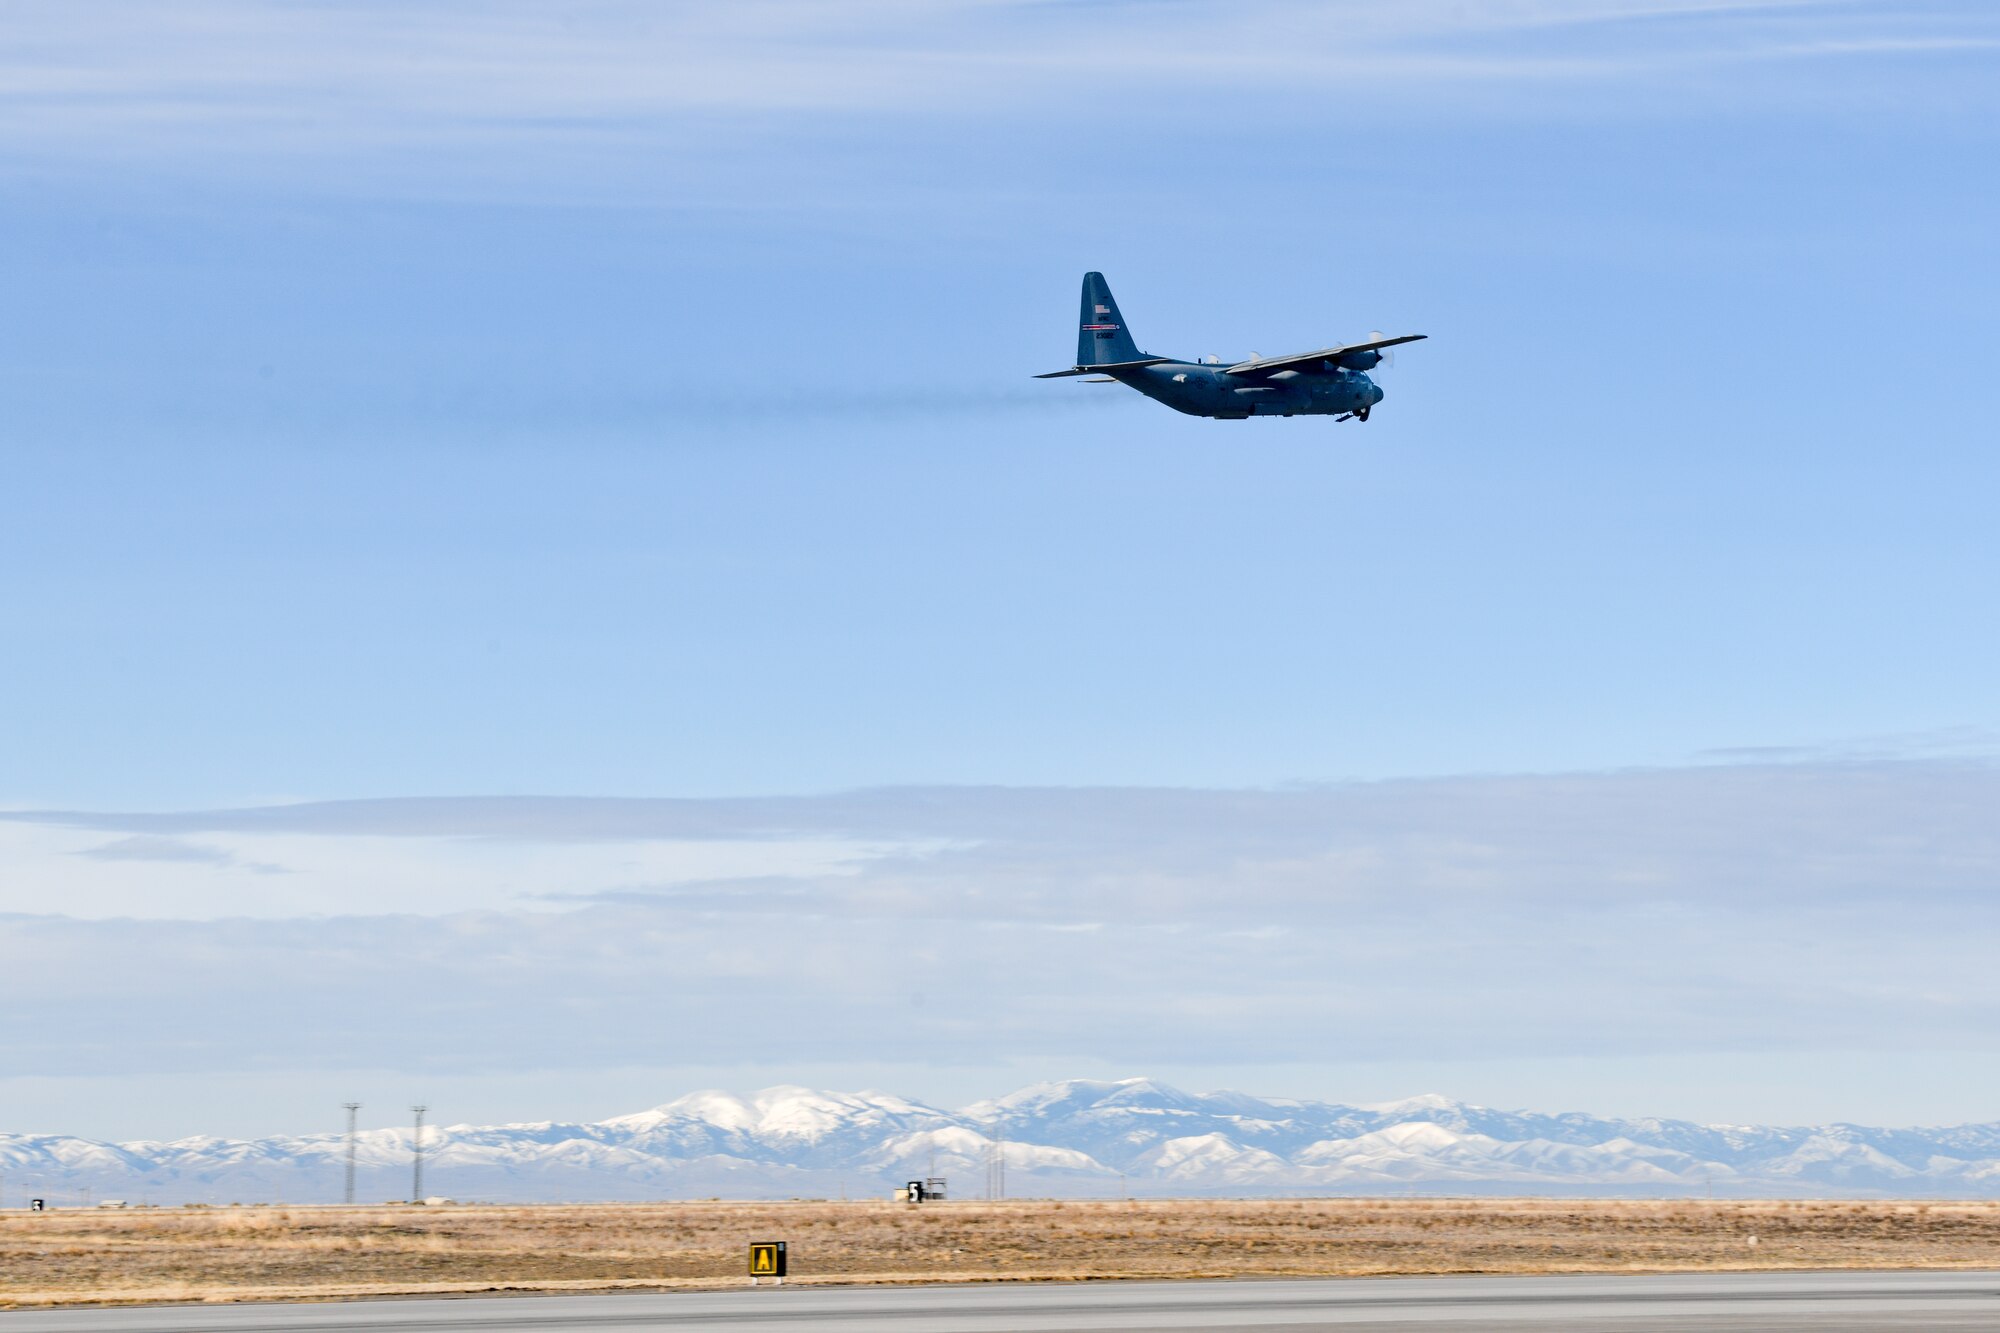 A 910th Airlift Wing C-130H Hercules aircraft takes off from Mountain Home Air Force Base, Idaho, on Jan. 18, 2023.